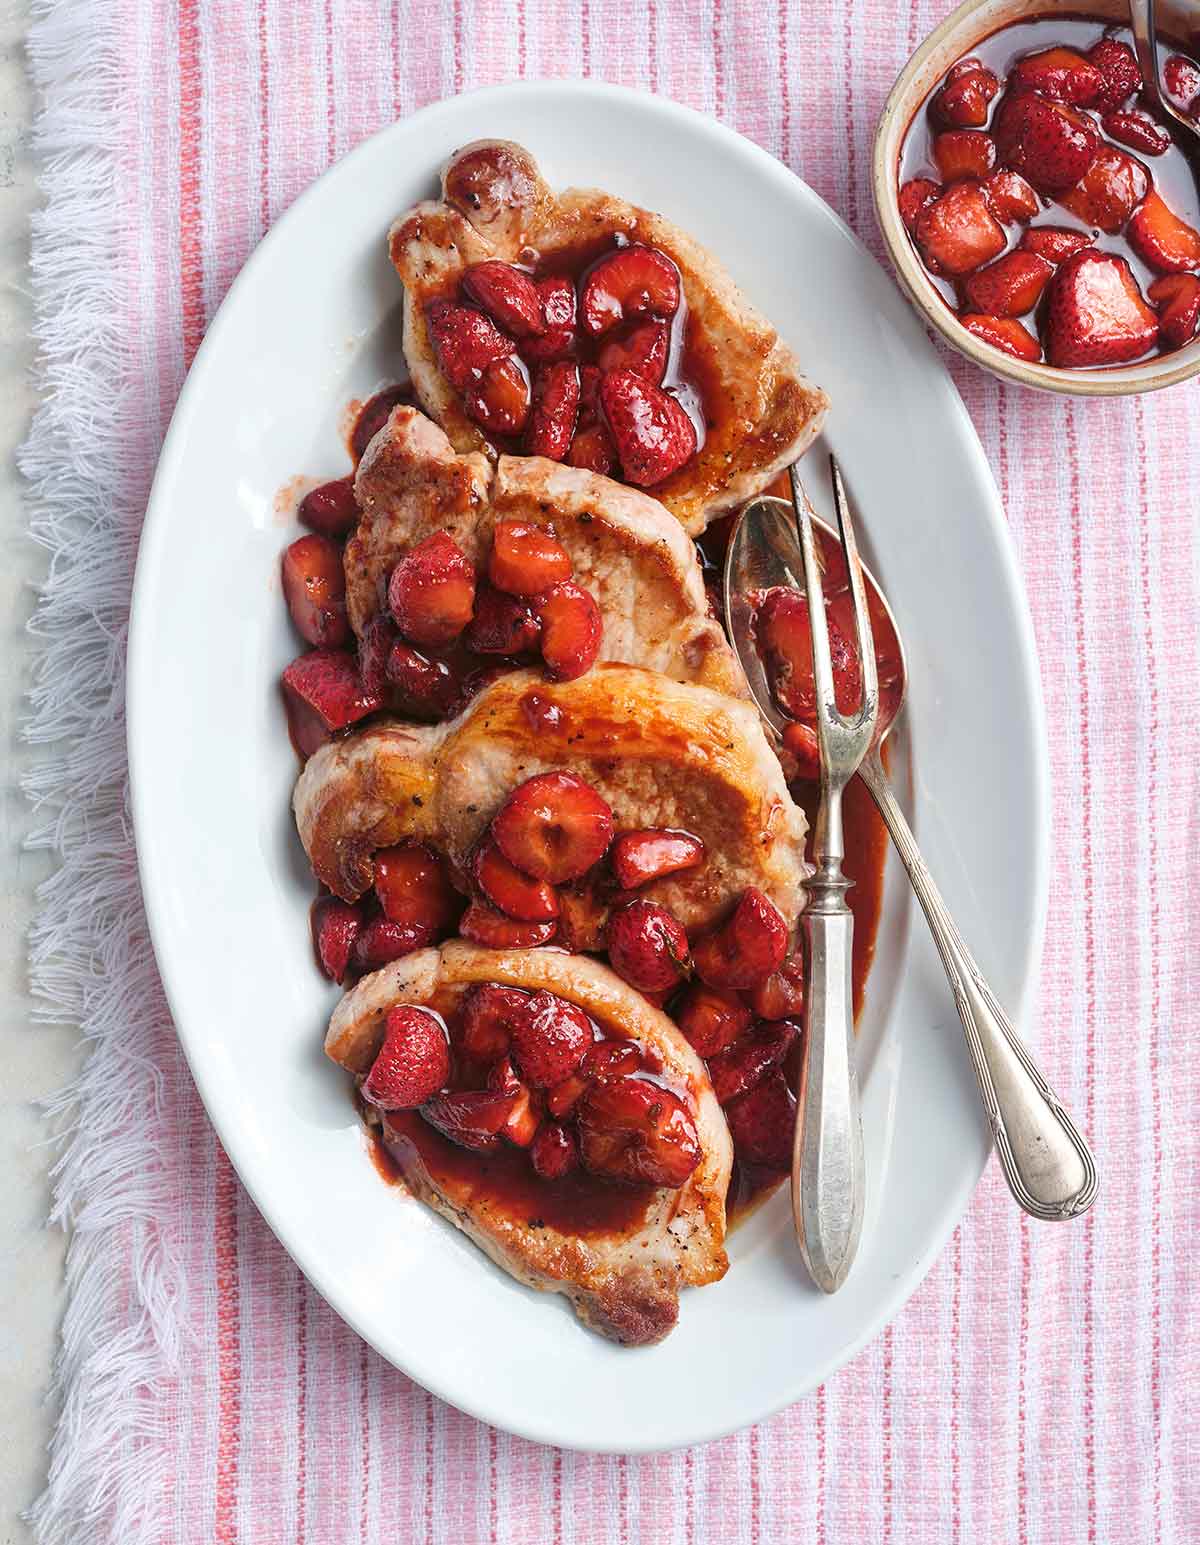 Four pork chops with strawberry balsamic sauce on top arranged on a white oval platter with serving utensils and a bowl of strawberry sauce on the side.